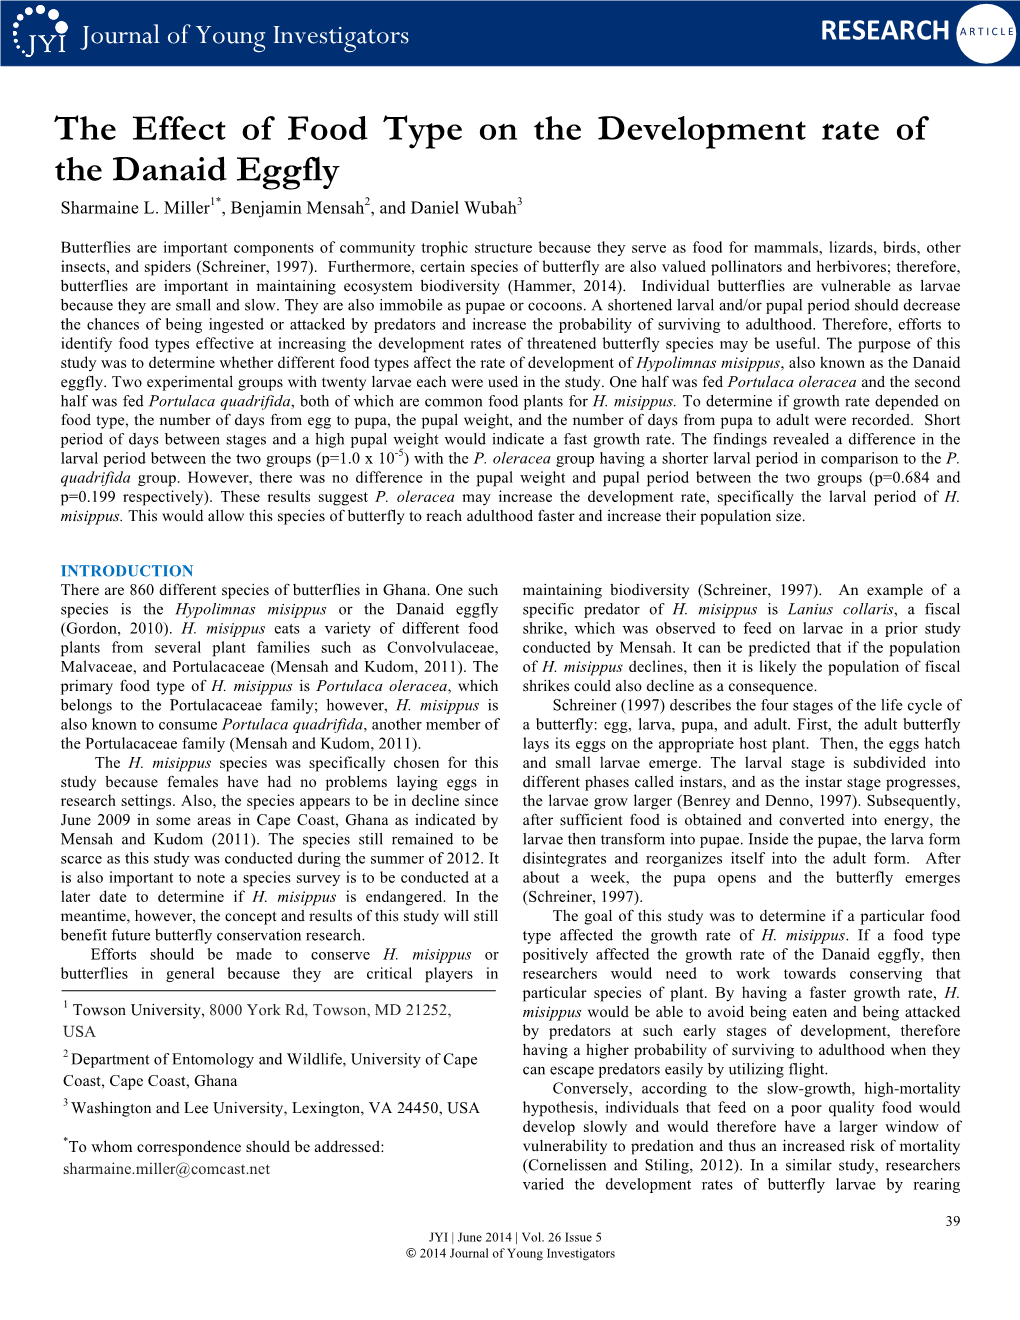 The Effect of Food Type on the Development Rate of the Danaid Eggfly Sharmaine L